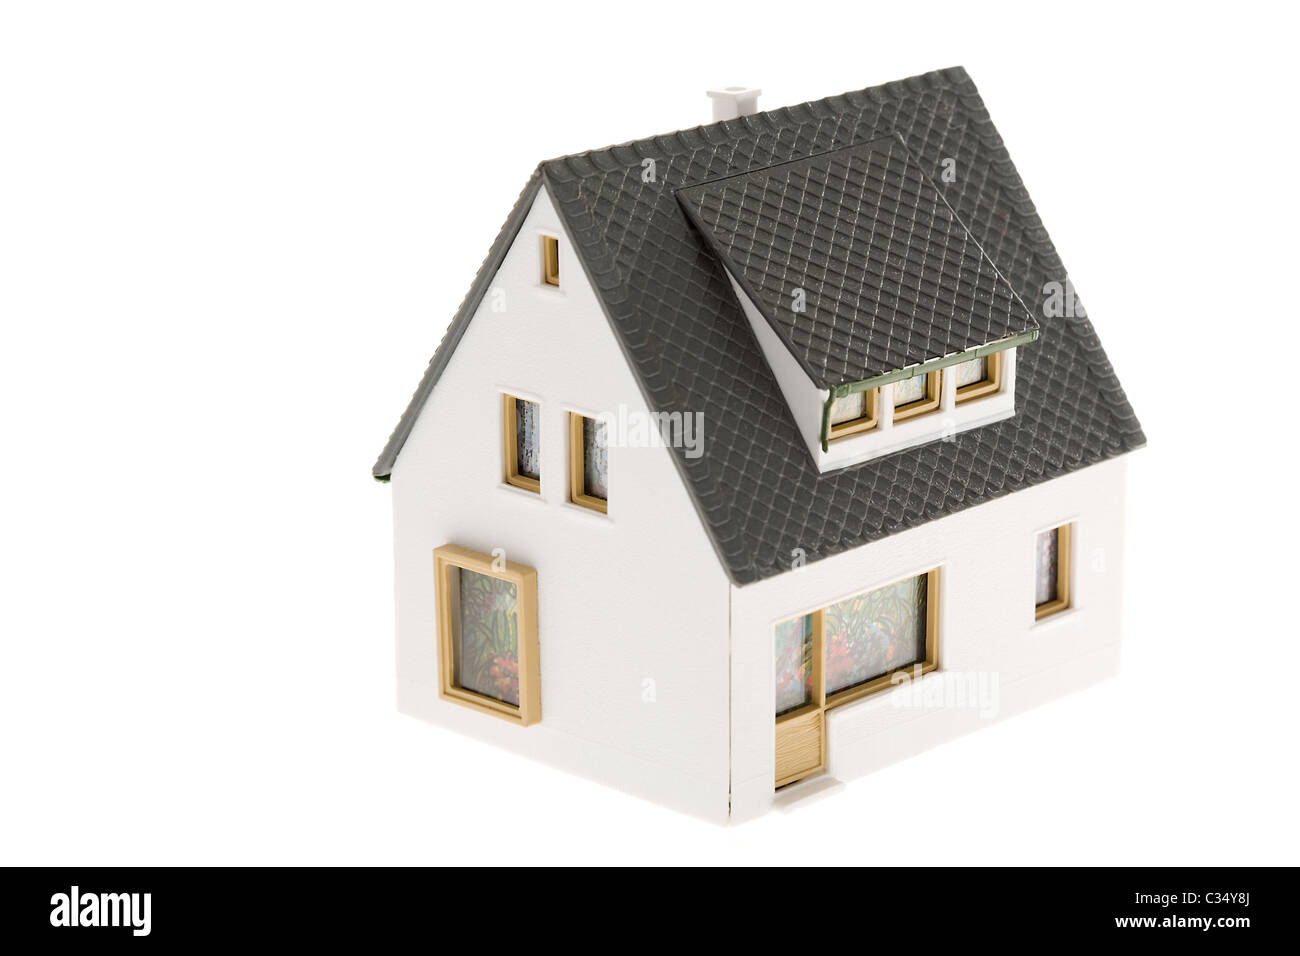 Close-up of toy house model on white background Stock Photo